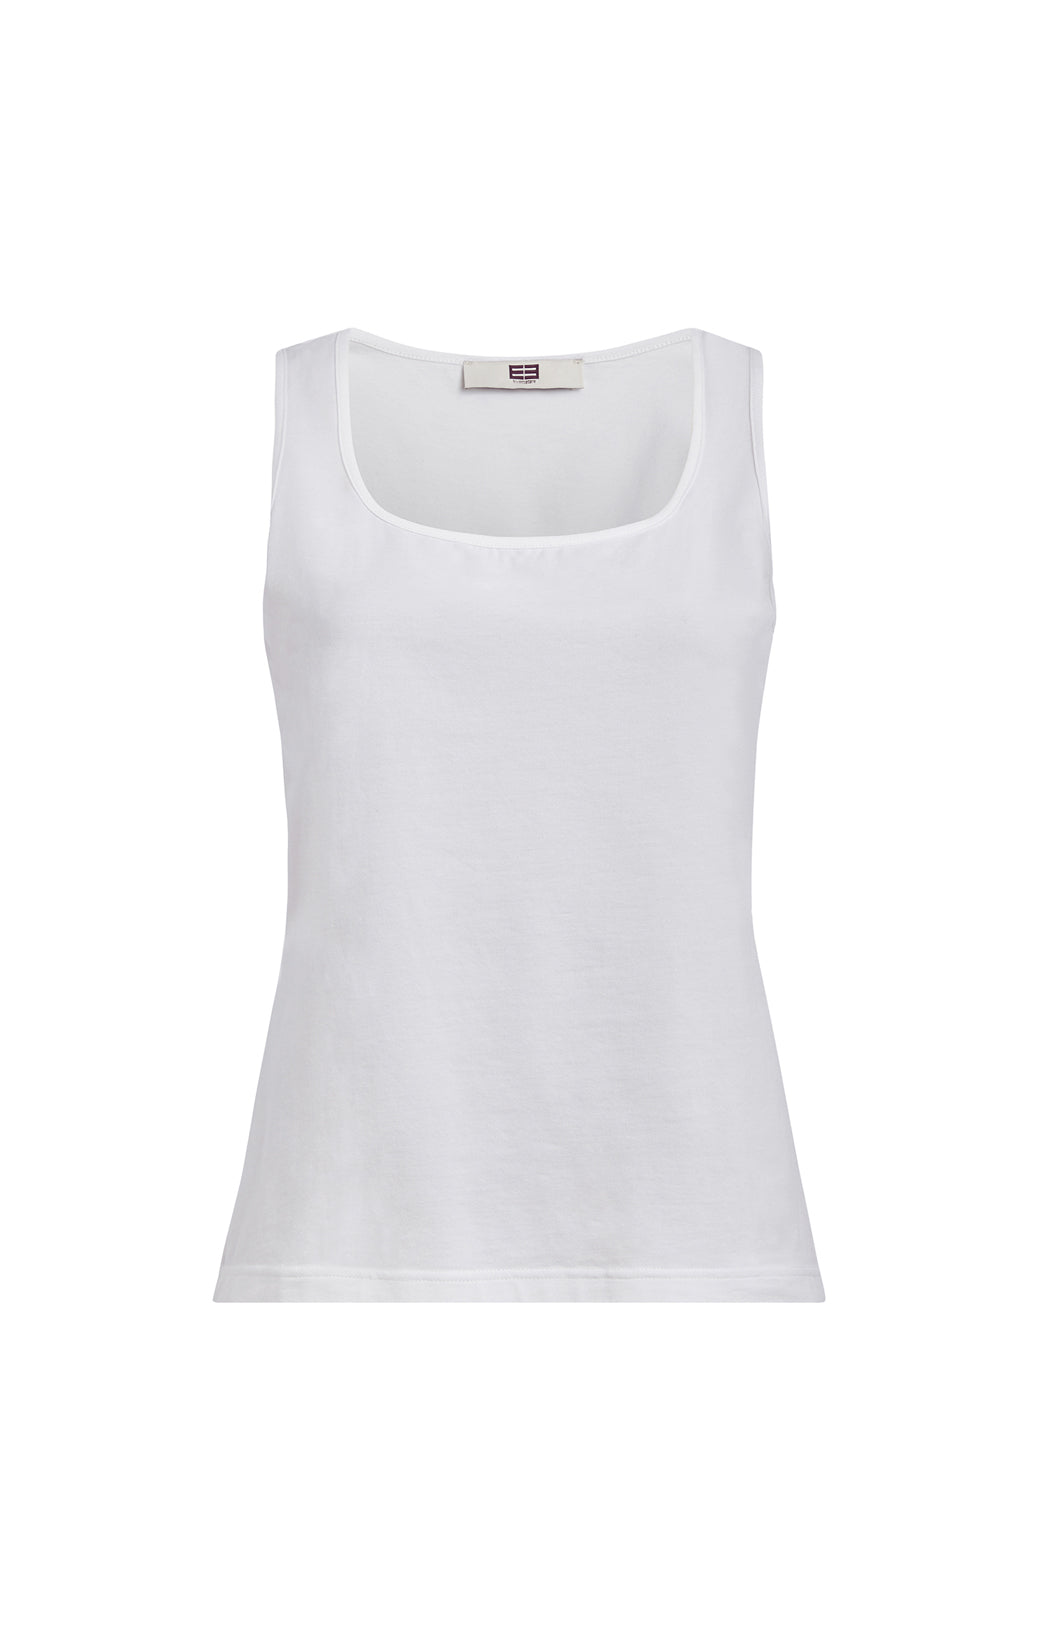 Laguna-Orn - Stretch Jersey Tank Top With Portrait Neck - Product Image